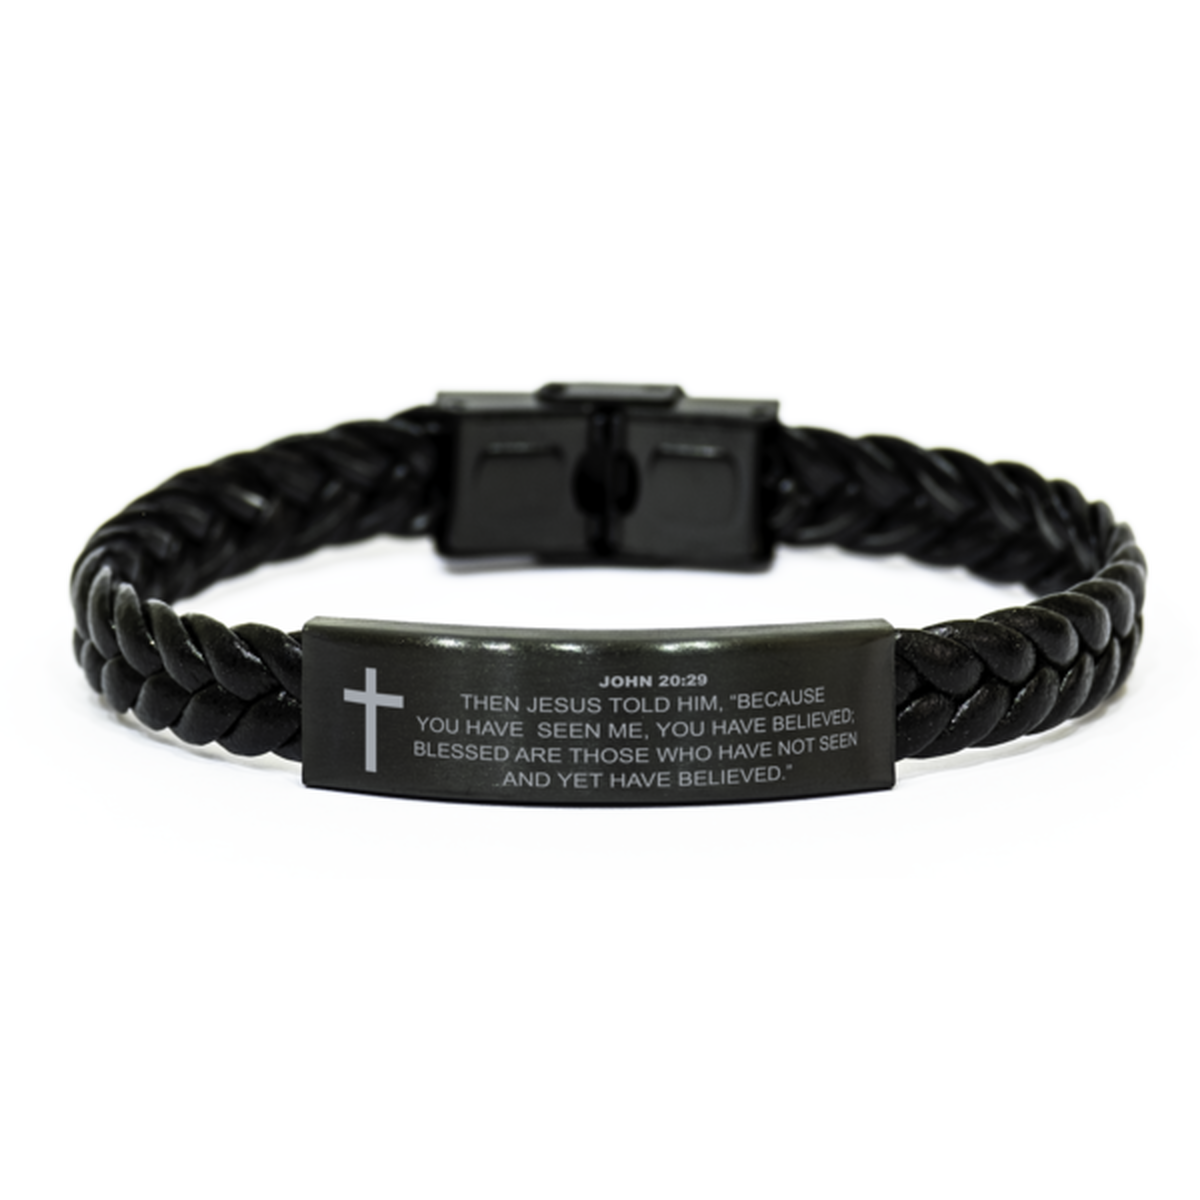 John 20:29 Bracelet, Blessed Are Those Who Have Not Seen And Yet Have Believed, Bible Verse Bracelet, Christian Bracelet, Braided Leather Bracelet